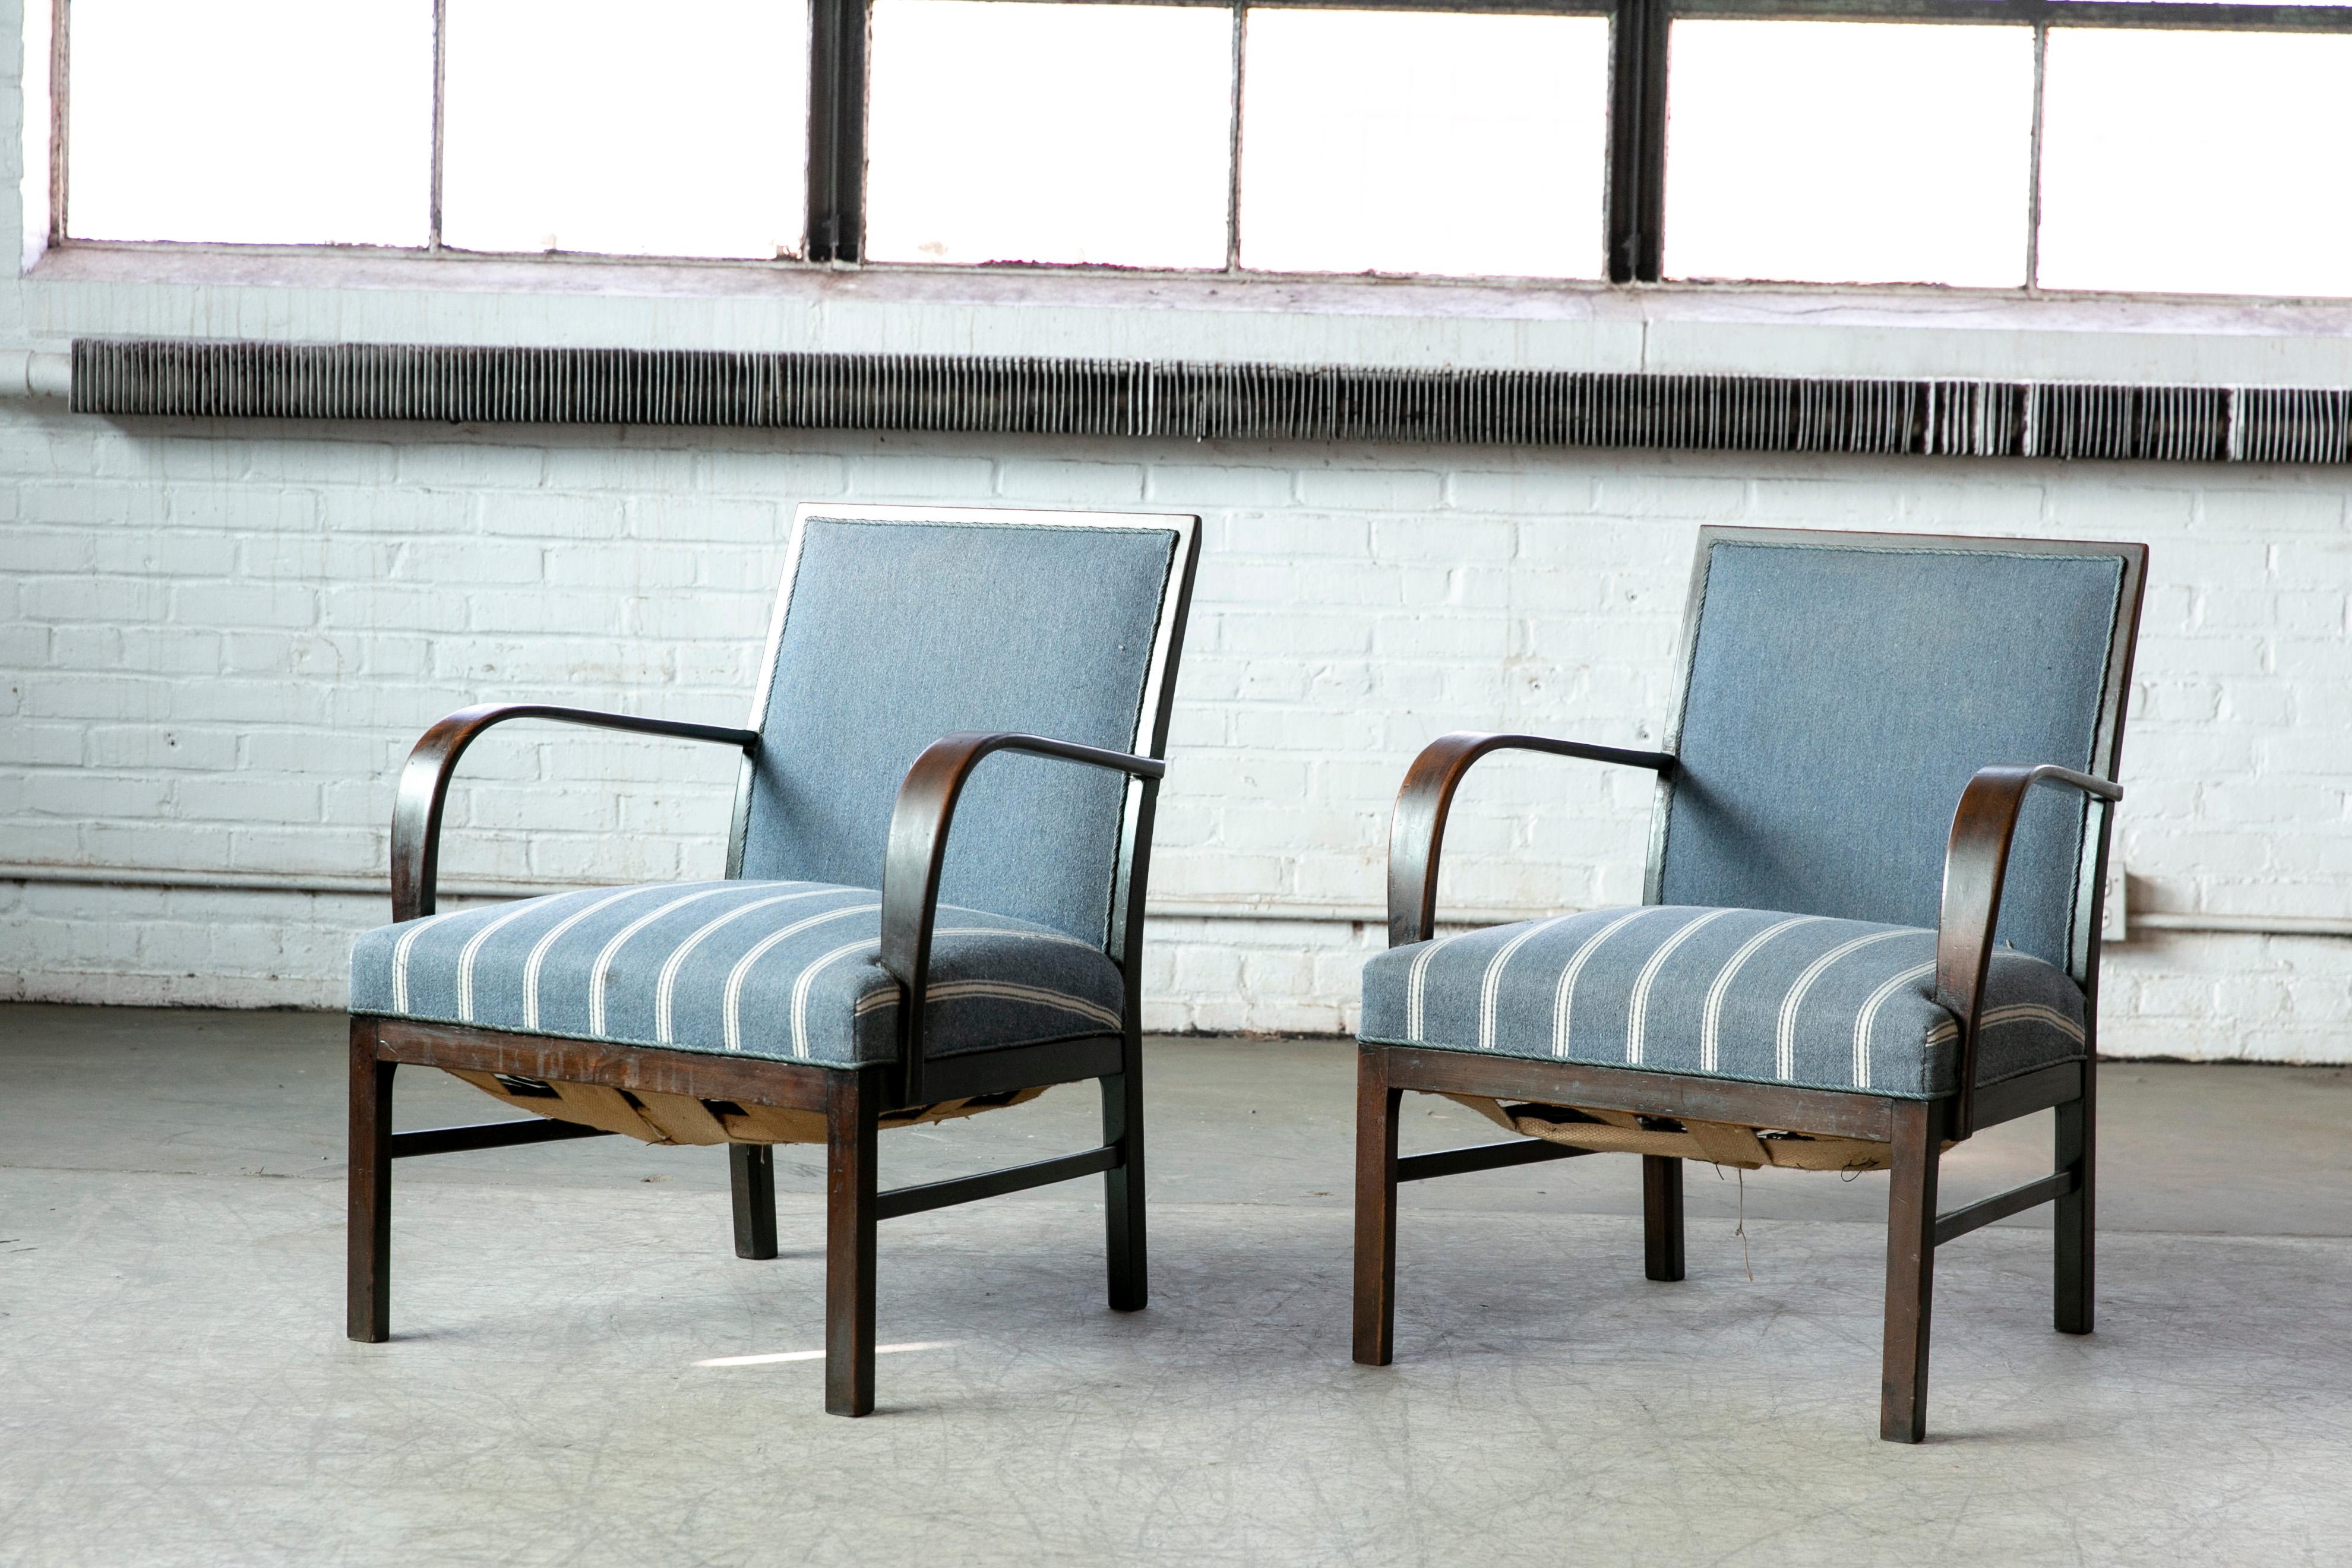 Mahogany Pair of Danish Early Midcentury or Art Deco Low Lounge Chairs Mahagony, 1940's For Sale